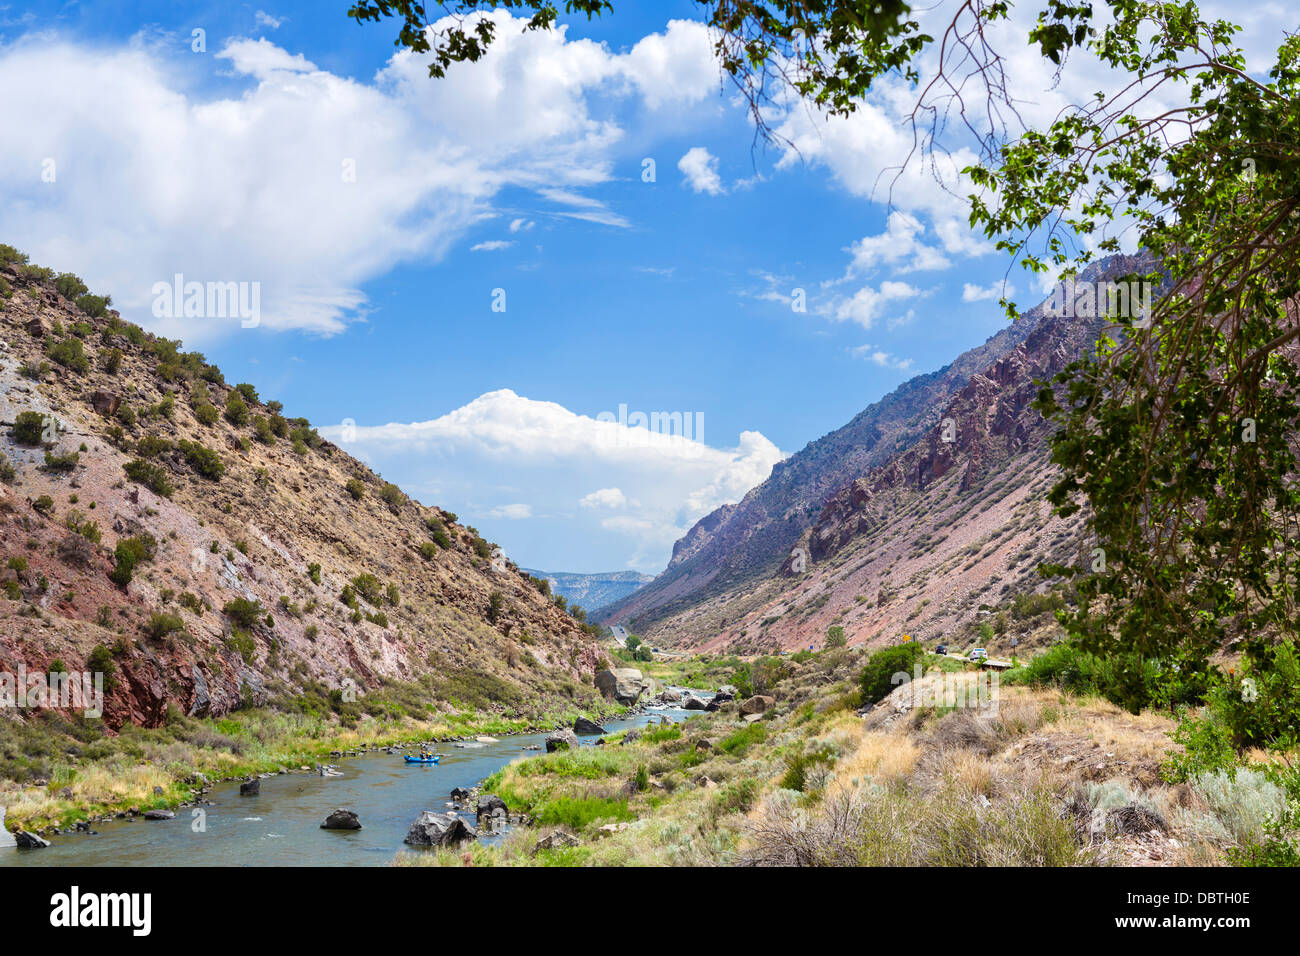 Rafting on the Rio Grande River in the Rio Grande Canyon south west of Taos, New Mexico, USA Stock Photo